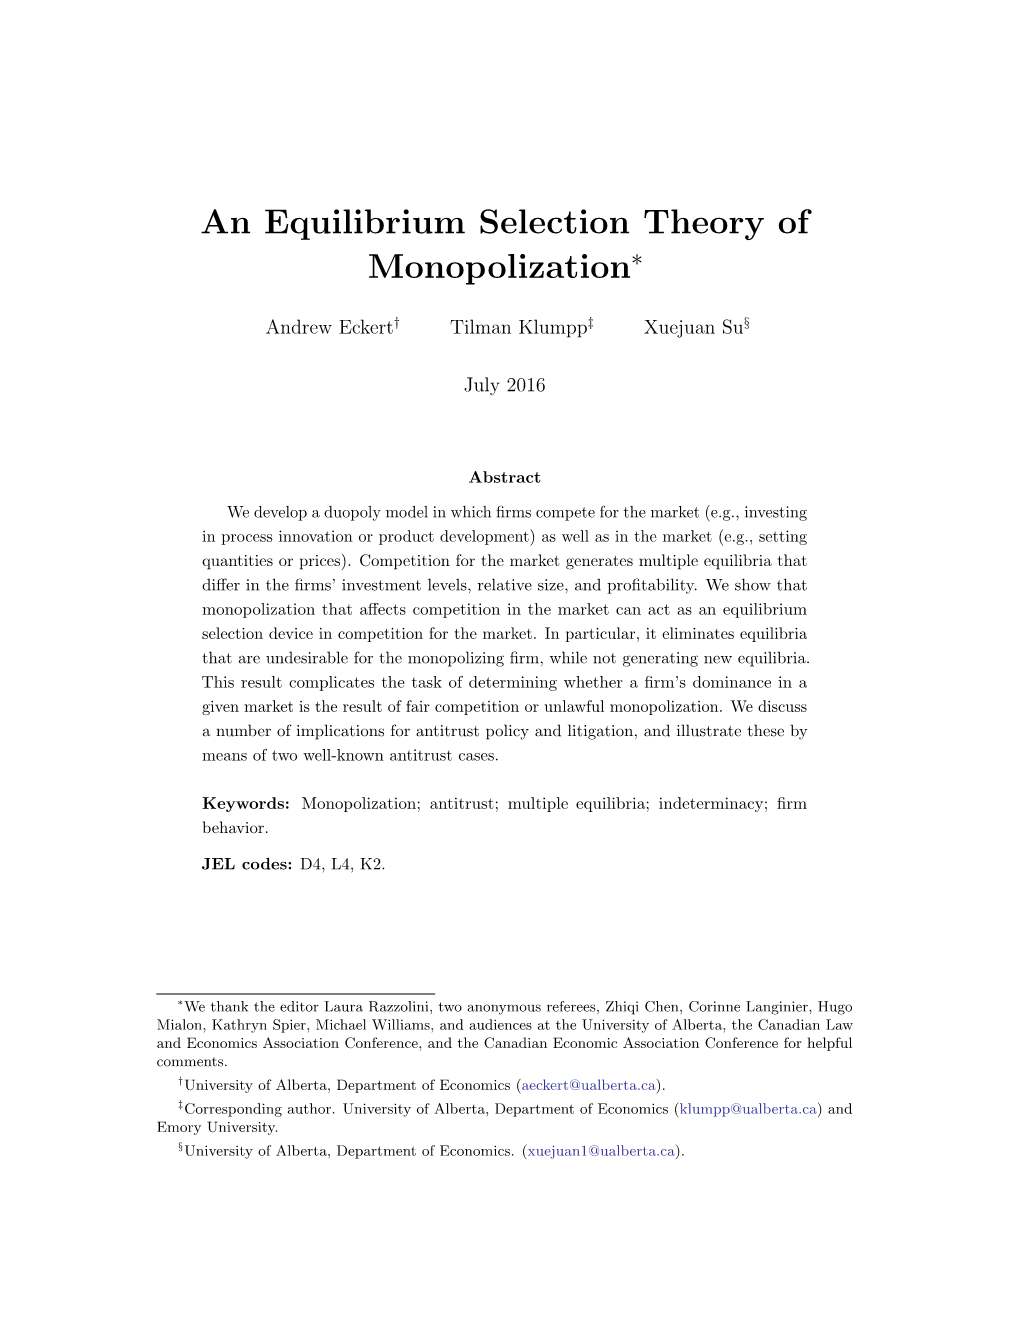 An Equilibrium Selection Theory of Monopolization∗